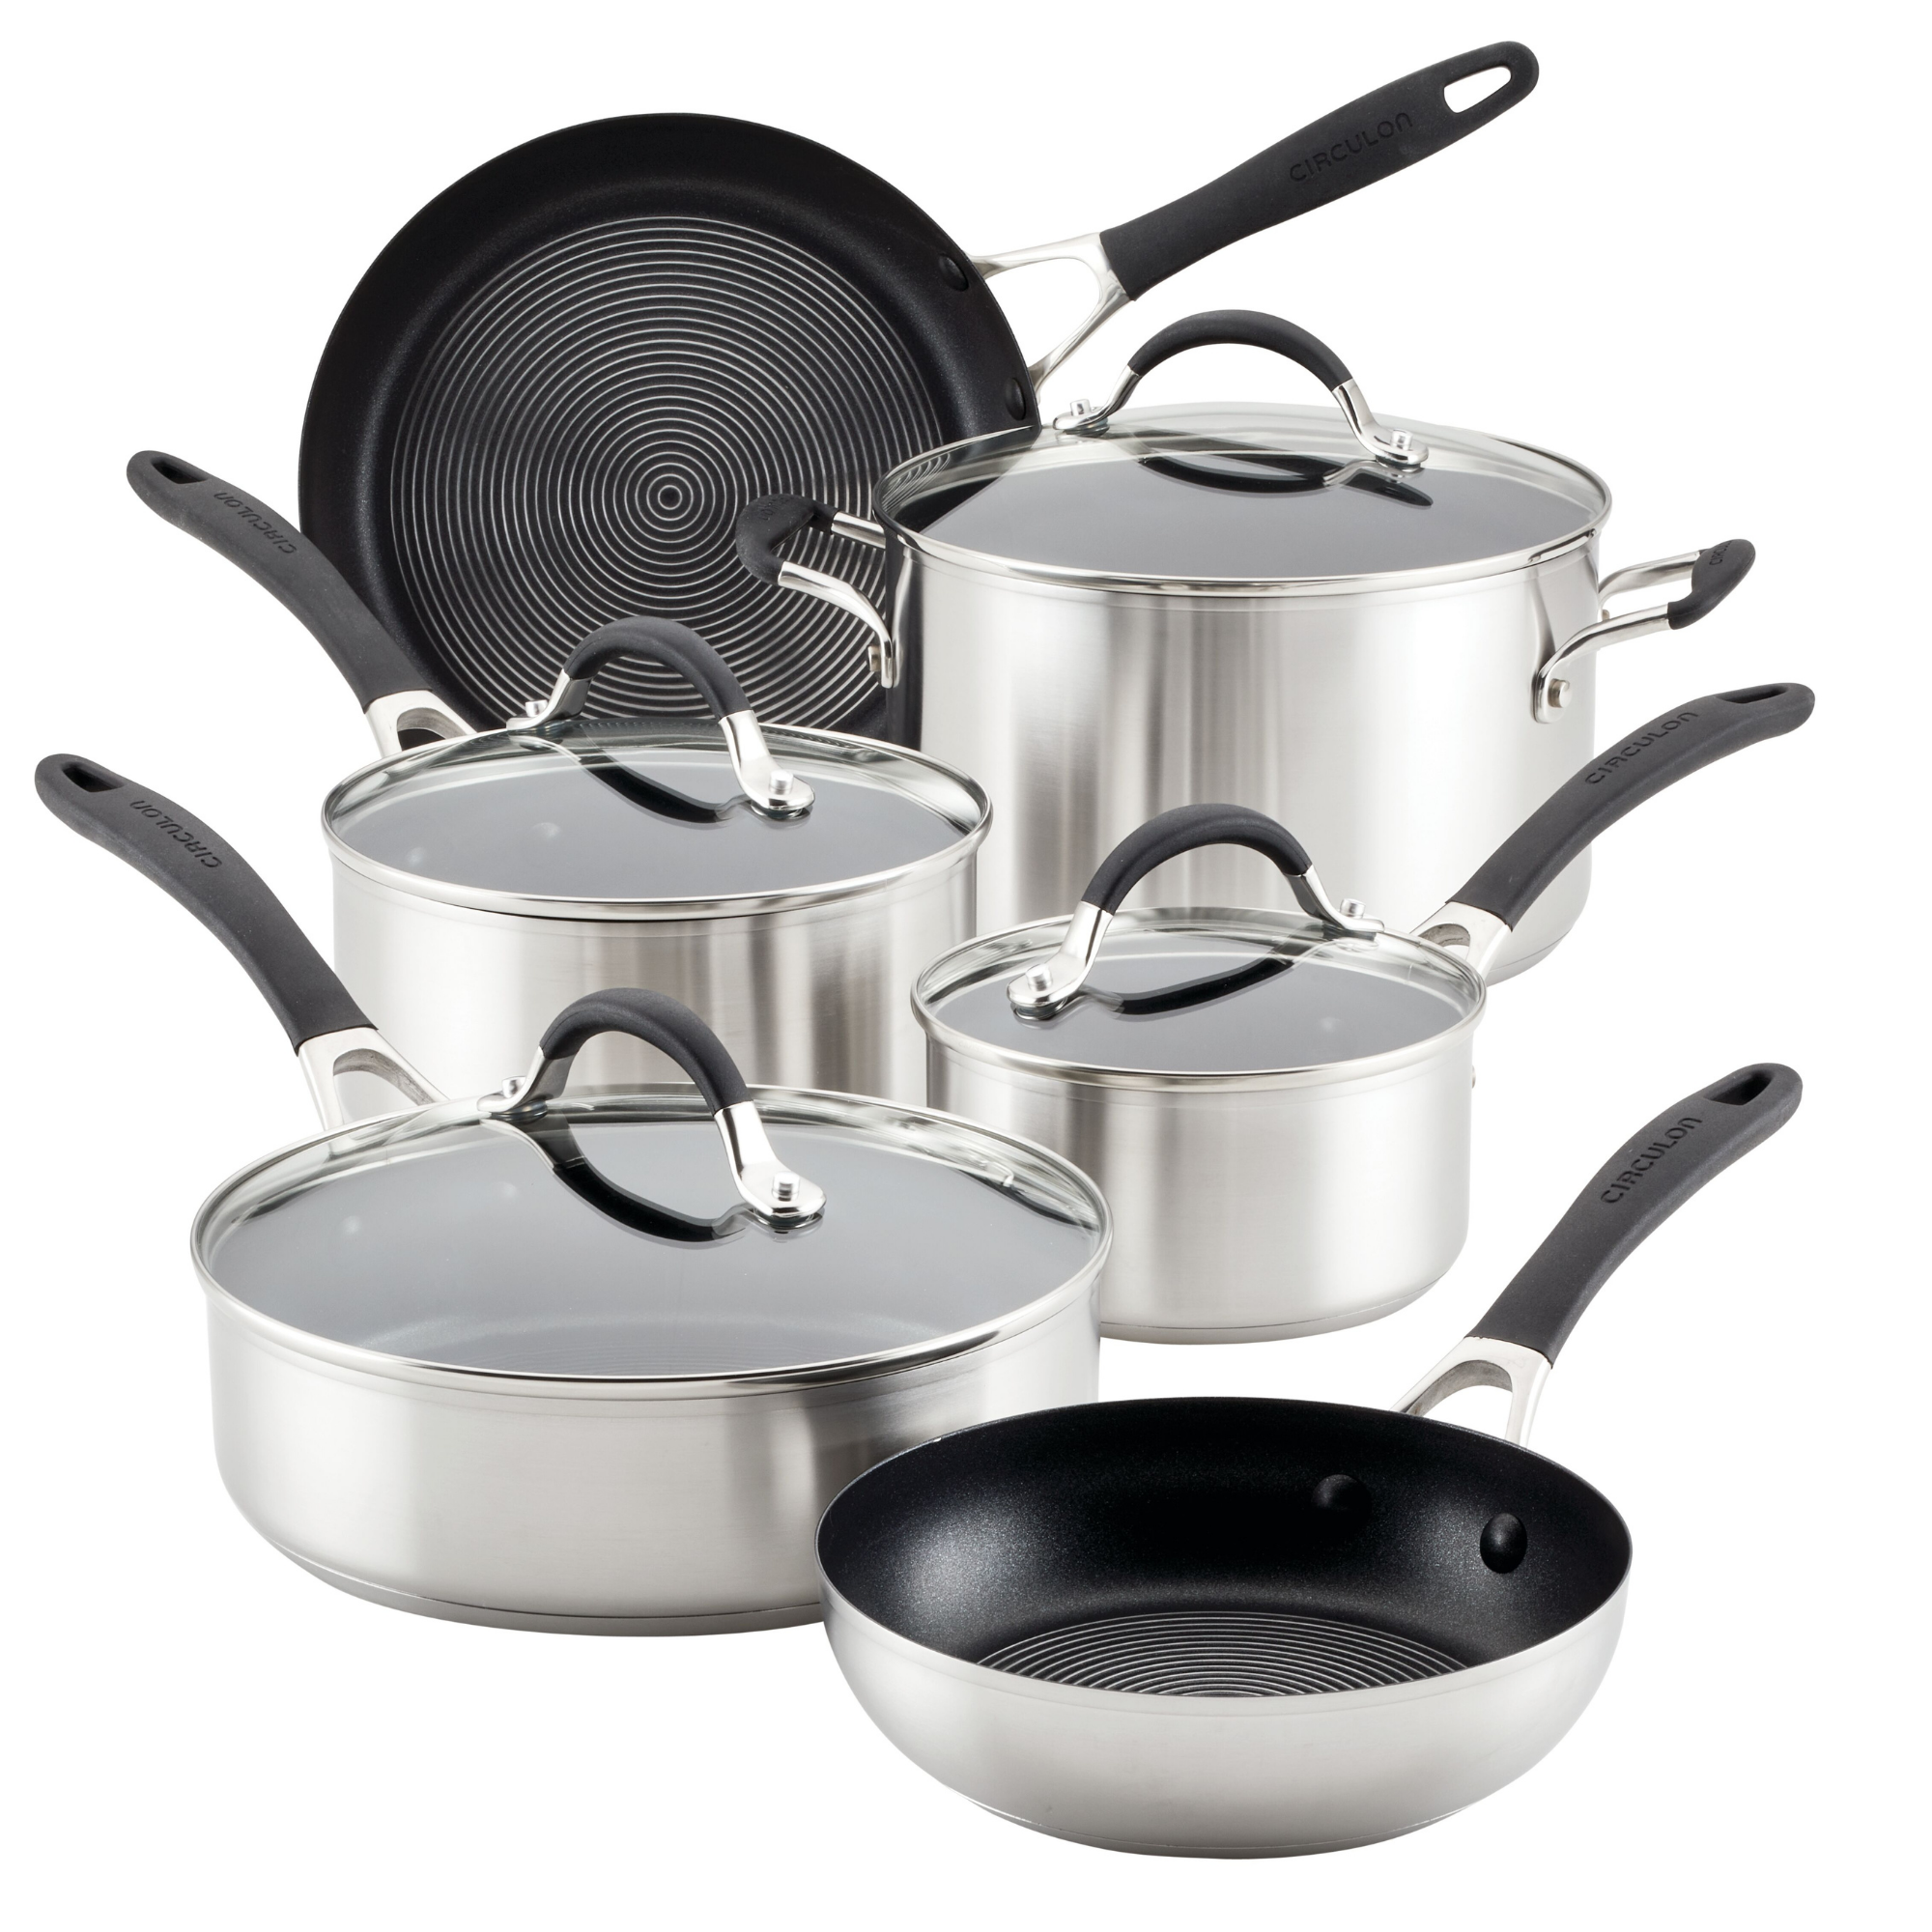 Circulon Cookware 10-Piece Tri-Ply Clad Nonstick Cookware Set with 2-Piece  Bonus Utensil Set in Stainless Steel